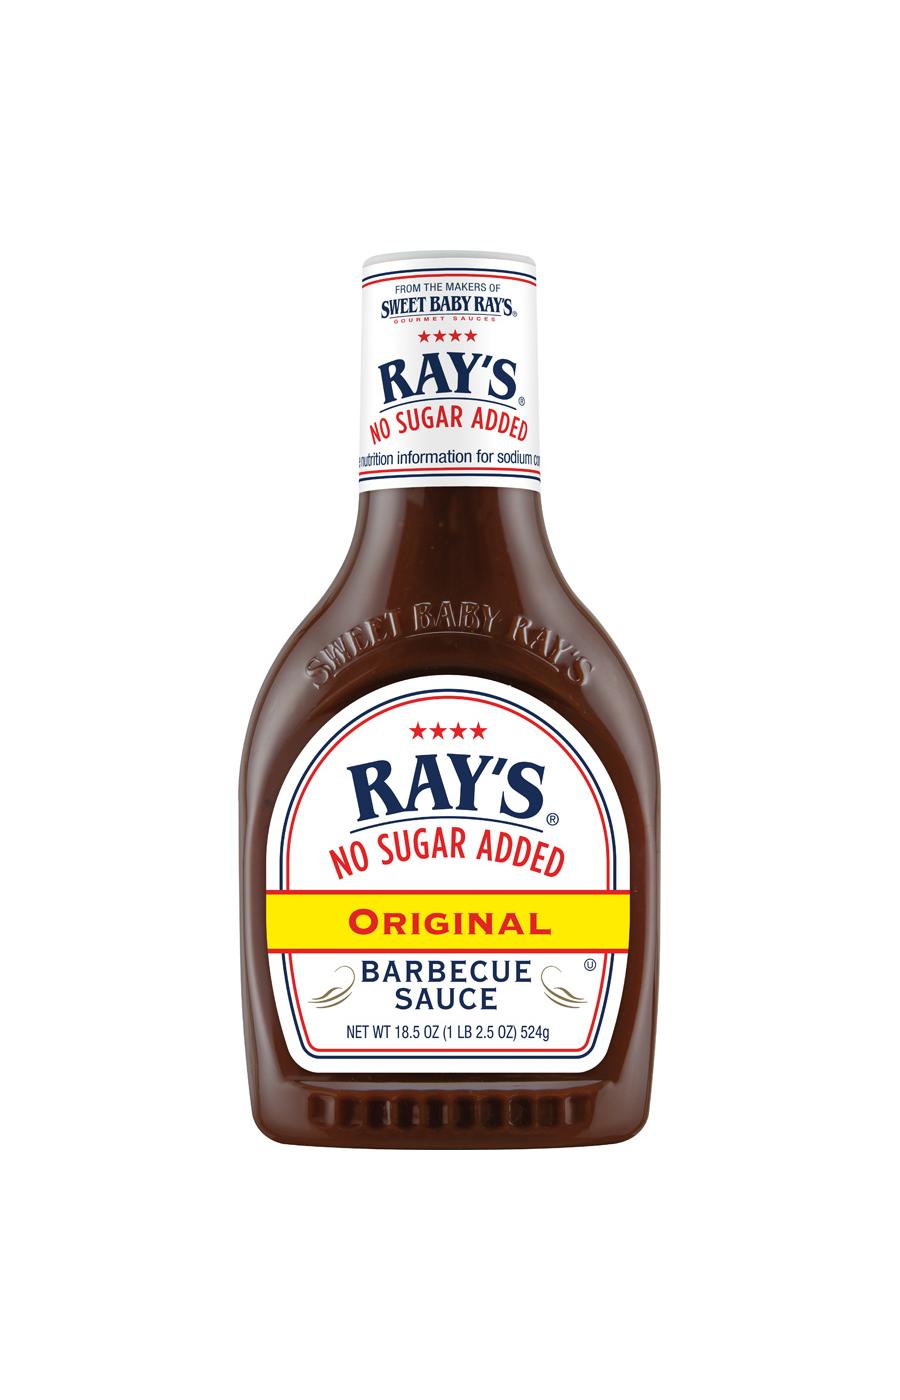 Sweet Baby Ray's No Sugar Added Original Barbecue Sauce; image 1 of 4